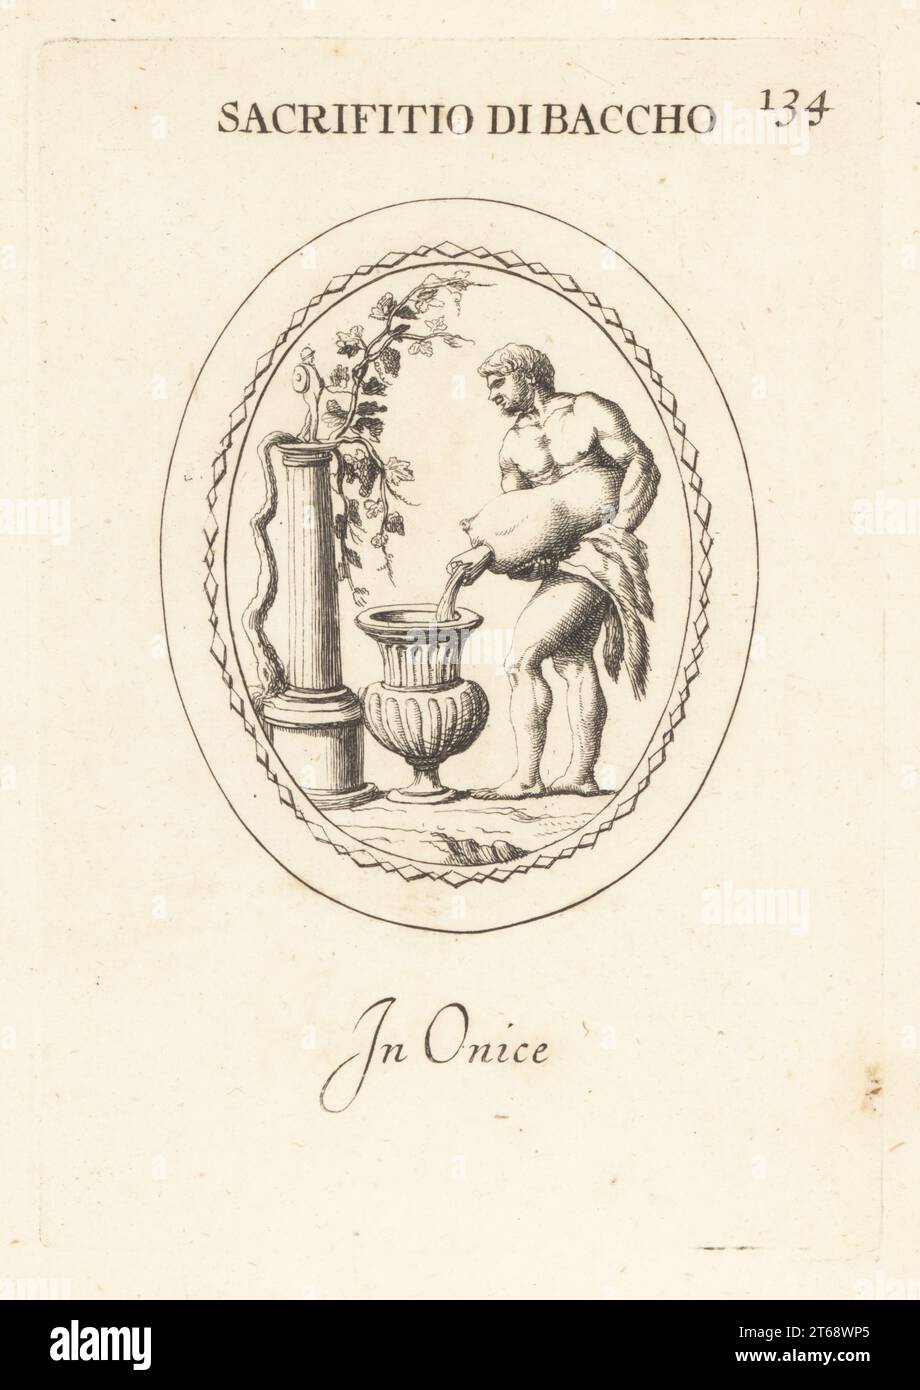 A rustic sacrifice to Bacchus, the Roman god of wine. A farmer pours wine into a vase or carchesium consecrated to Bacchus. Altar with grapes on a vine. In onyx. Sacrifitio di Baccho. In Onice. Copperplate engraving by Giovanni Battista Galestruzzi after Leonardo Agostini from Gemmae et Sculpturae Antiquae Depicti ab Leonardo Augustino Senesi, Abraham Blooteling, Amsterdam, 1685. Stock Photo